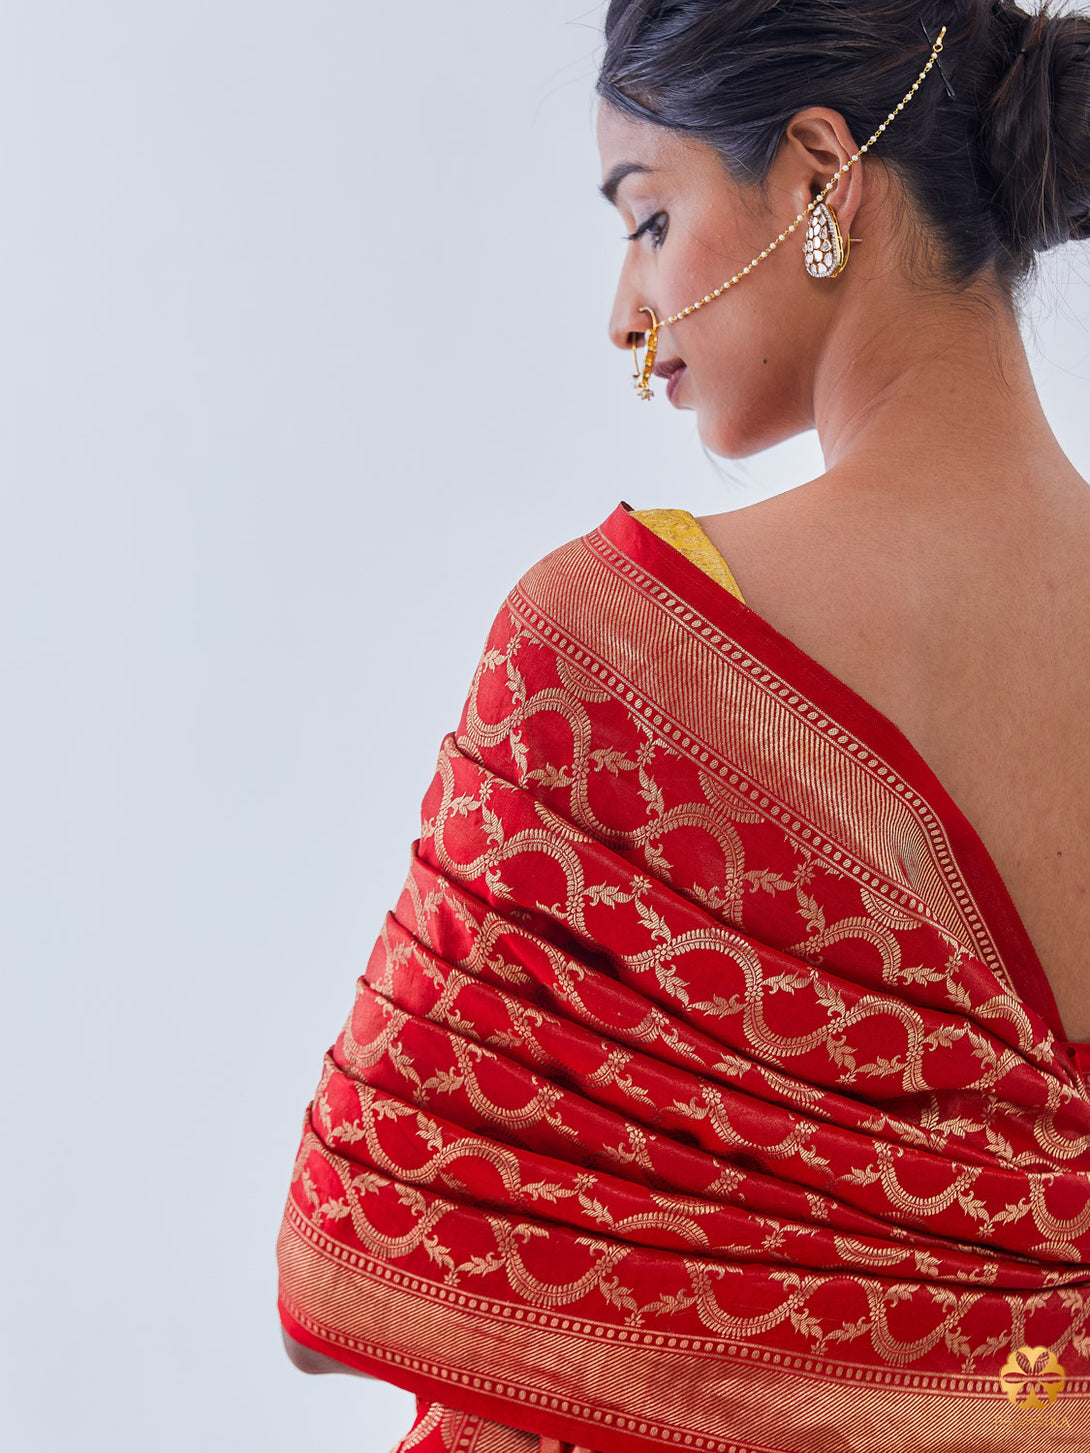 Beautiful Drape of Exquisite Handwoven Silk Saree - Grace and Sophistication